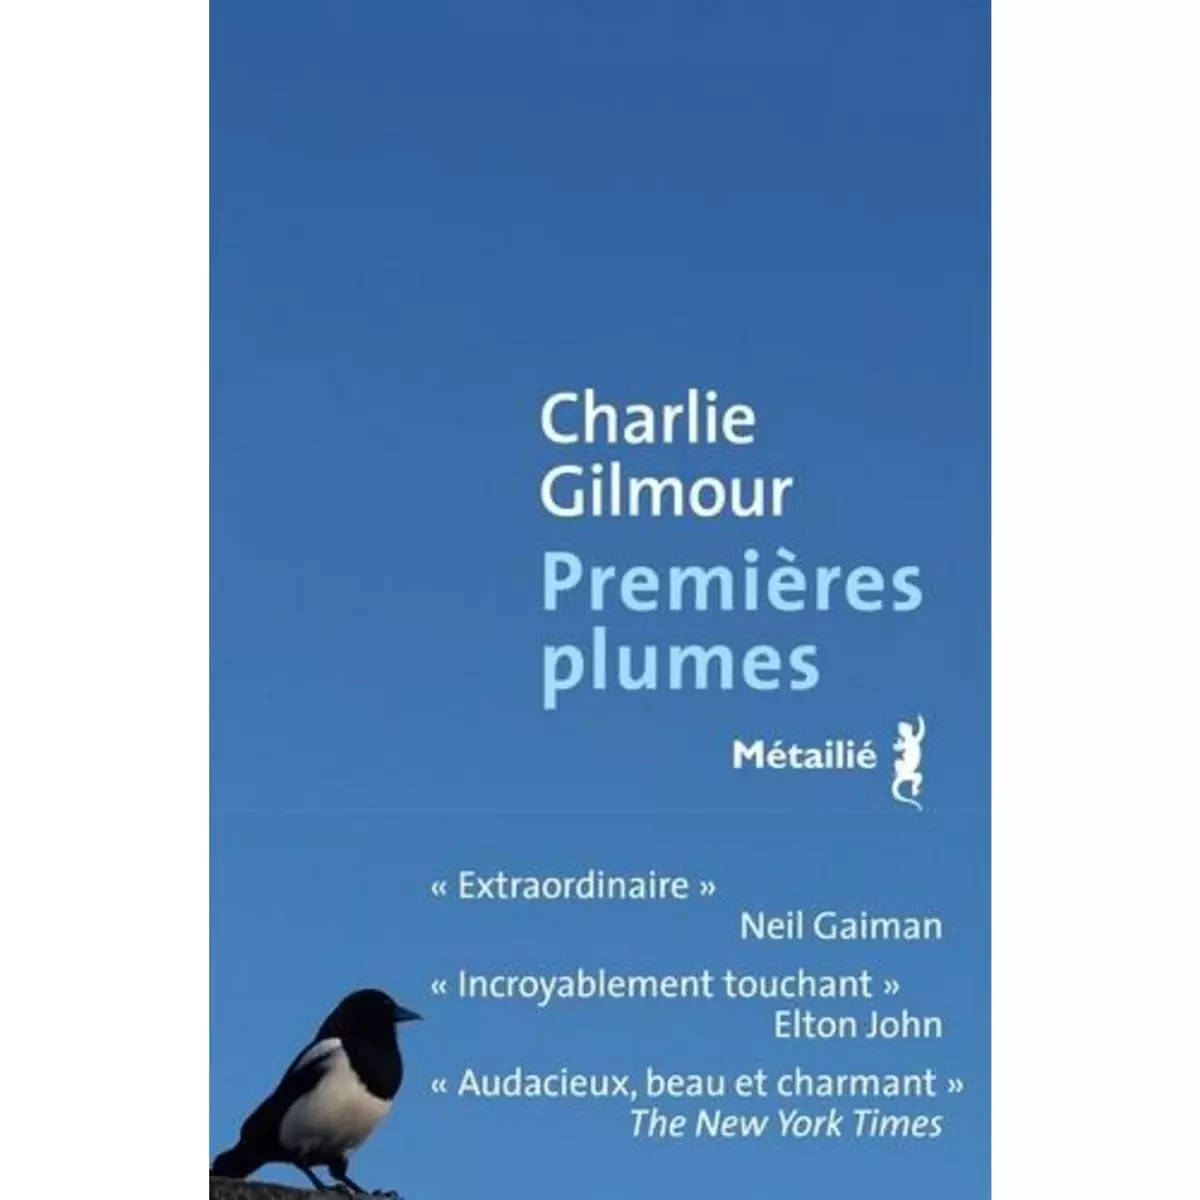  PREMIERES PLUMES, Gilmour Charlie